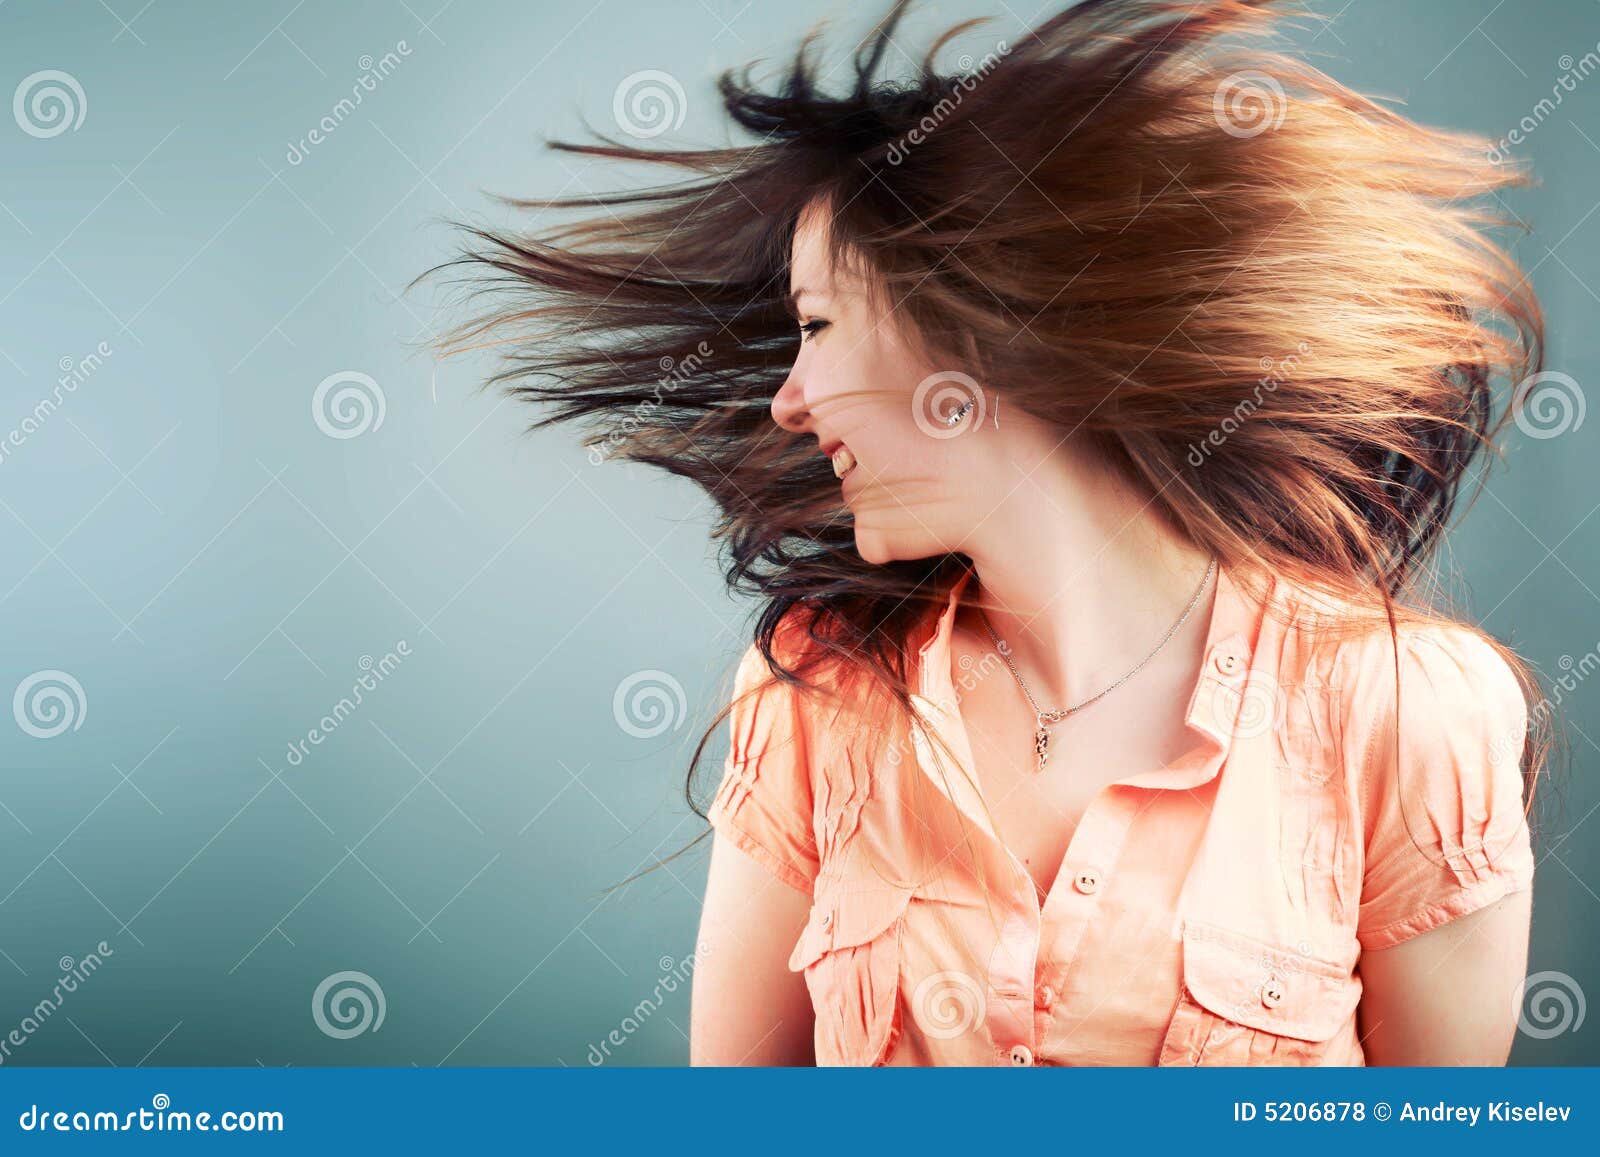 Hair style girl stock photo. Image of face, human, beautiful - 5206878